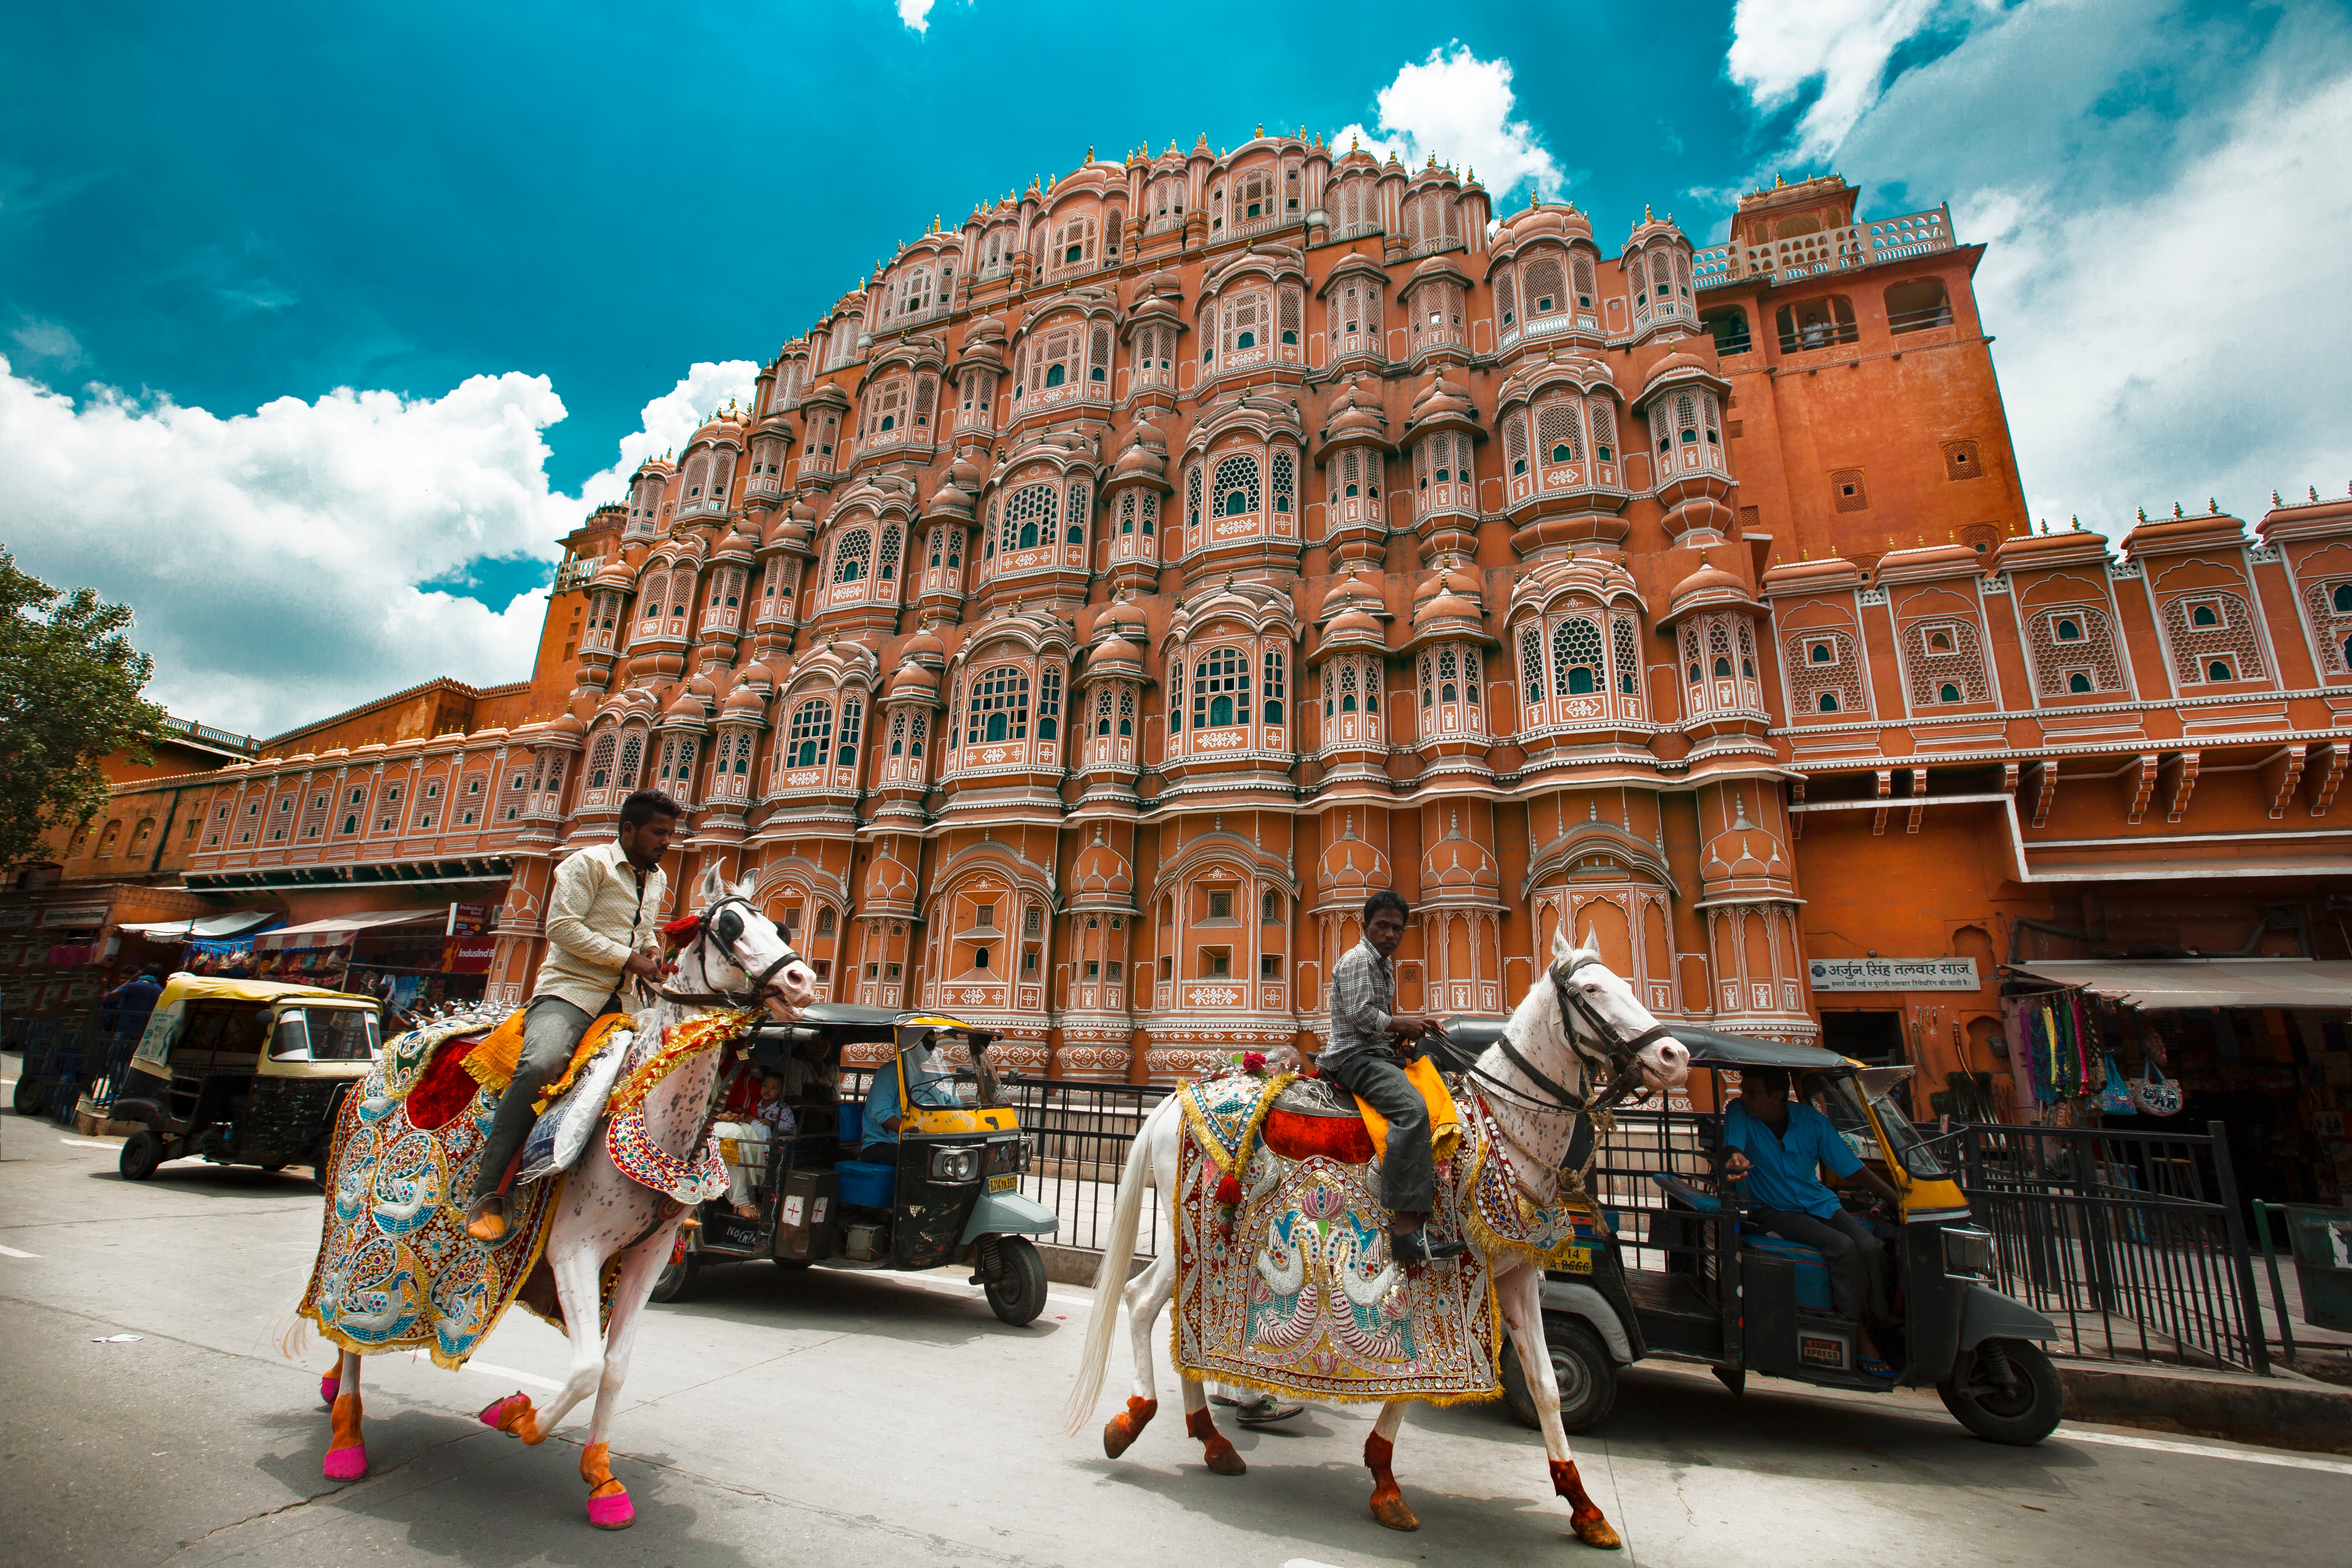 Hawa Mahal is a wonder of Jaipur. It's a beautiful palace. Here is the honeycomb structure of Hawa Mahal with people on horses on the road. 